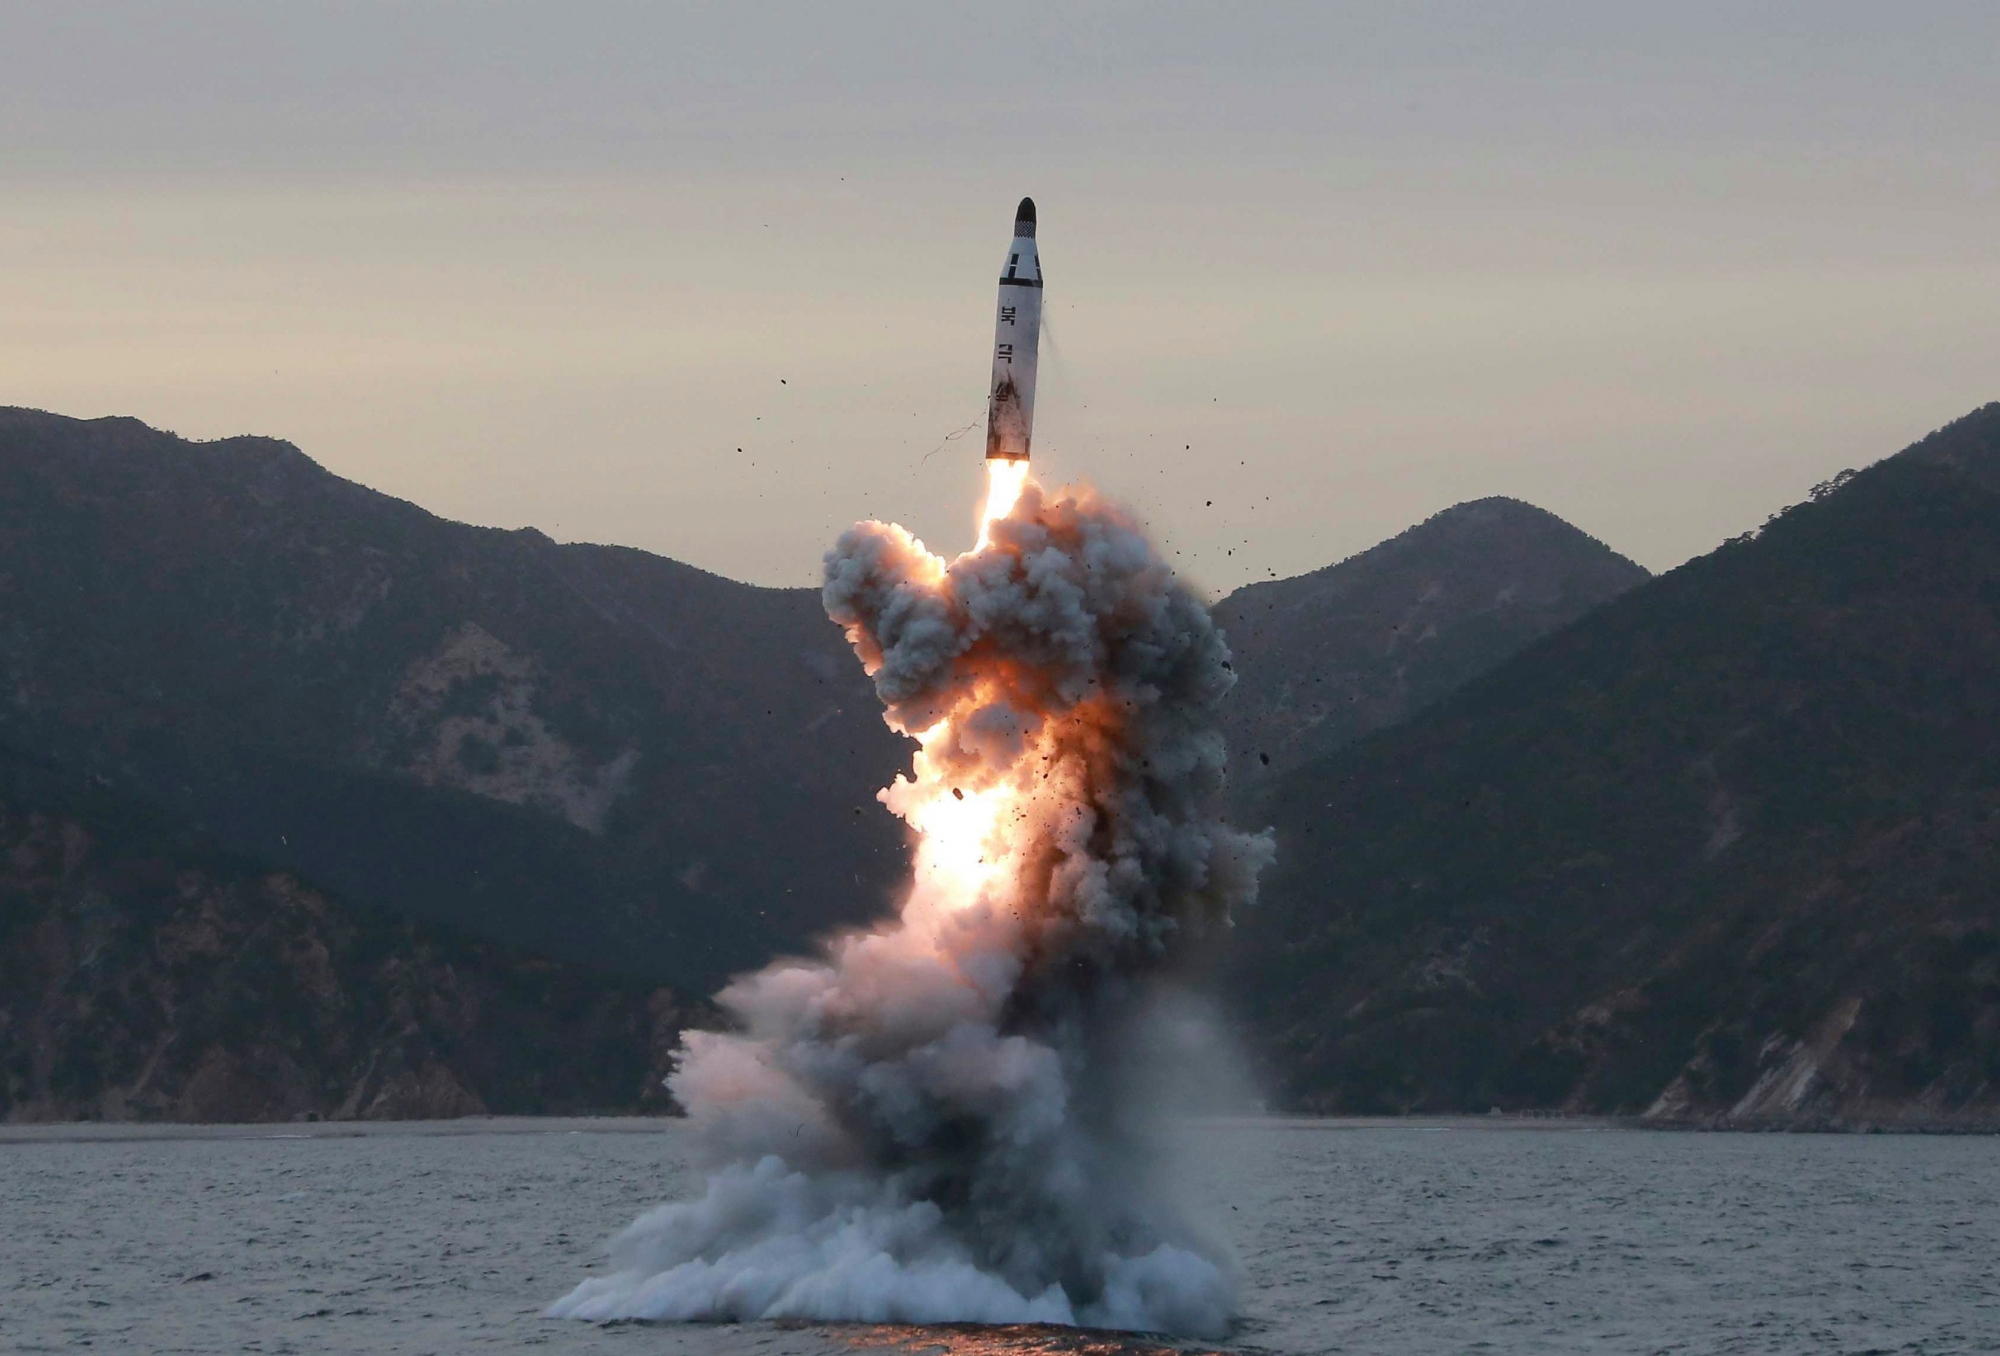 epa05862569 (FILE) - An undated file photo released by the North Korean Central News Agency (KCNA), the state news agency of North Korea, shows an 'underwater test-fire of strategic submarine ballistic missile' conducted at an undisclosed location in North Korea (reissued 22 March 2017). According to media reports quoting a spokesman of the South Korean Defense Ministry, North Korea has test-fired several missiles in a suspected failed test on 22 March. The exact number or type of missiles being fired was not immediately known. US military announced on 21 March that they expected North Korea to perform missile tests in the following days. North Korea is under tough UN sanctions following its recent nuclear and missile tests at a moment of great tension in the Korean peninsula.  EPA/KCNA   EDITORIAL USE ONLY (FILE) NORTH KOREA DEFENSE MISSILE TEST